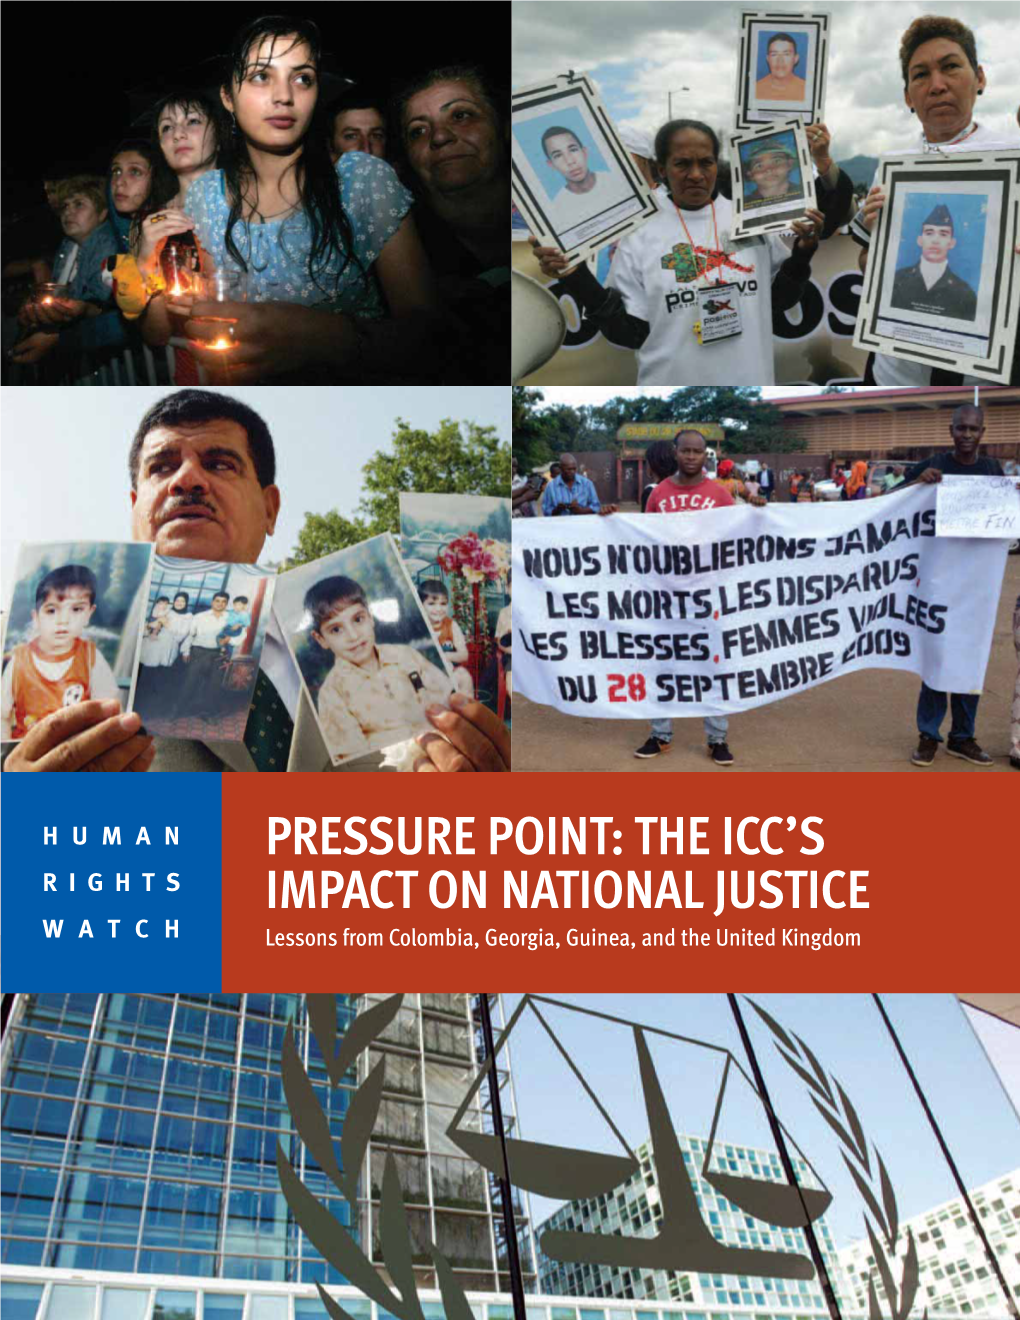 Pressure Point: the Icc's Impact on National Justice